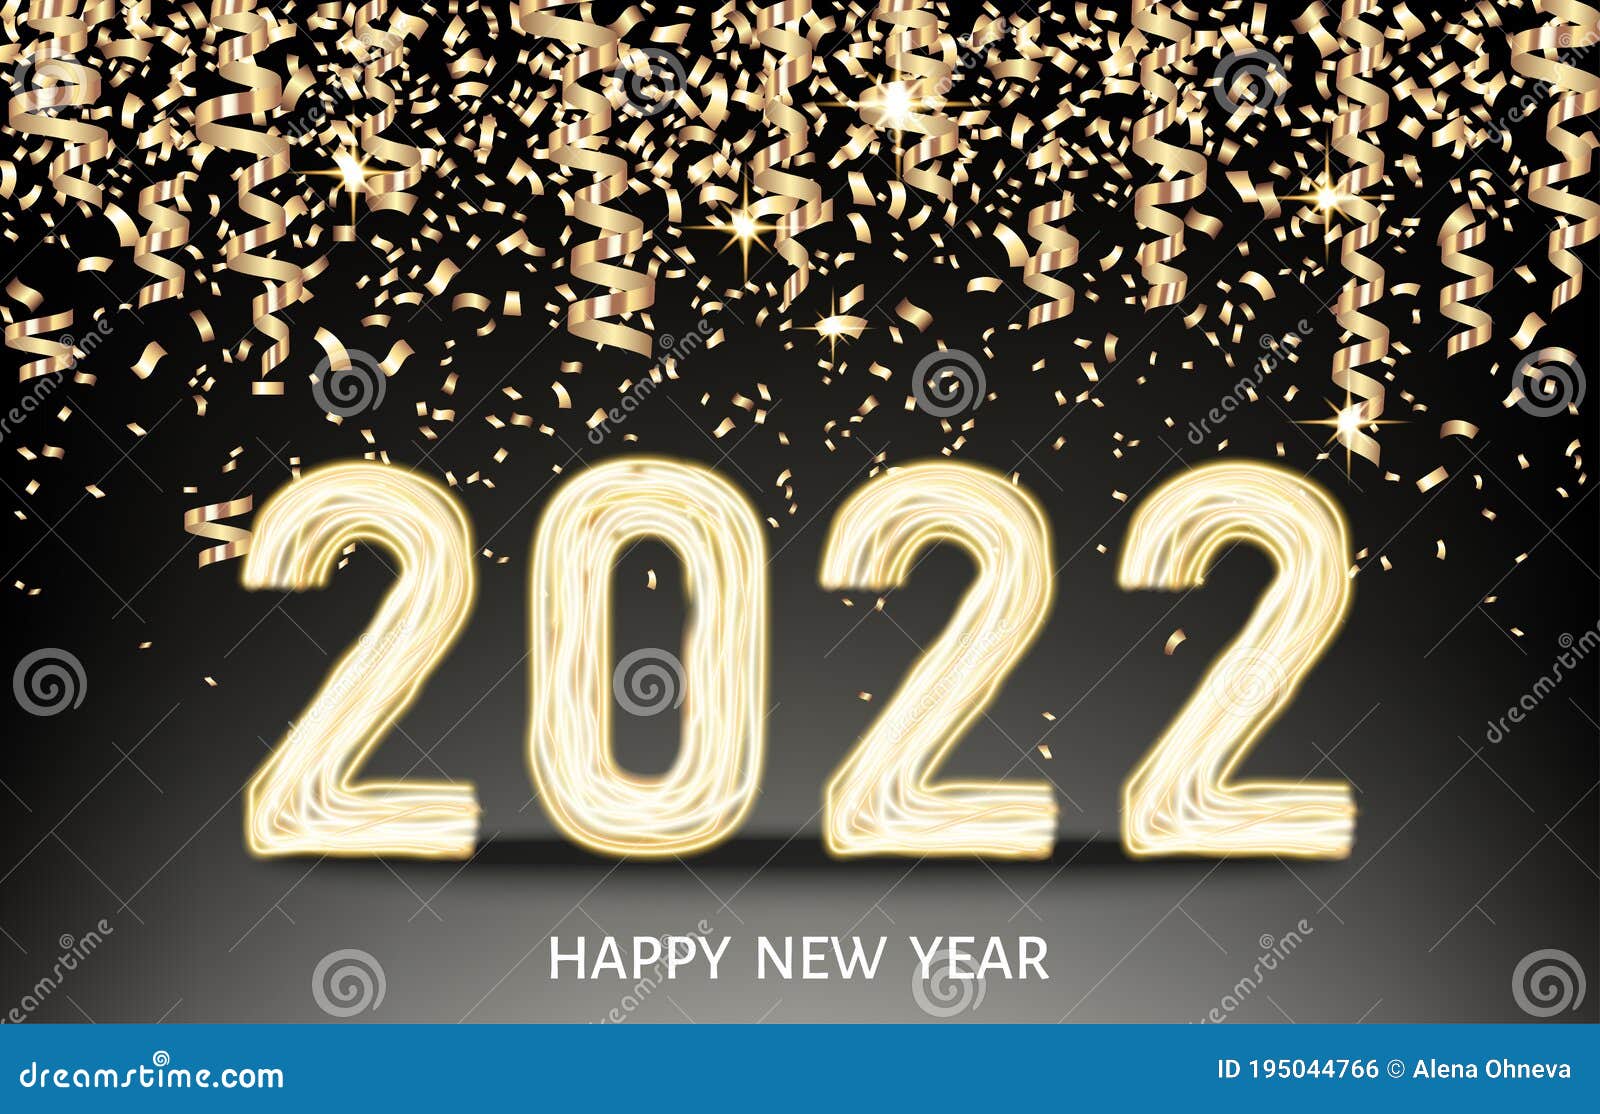  2022  Happy New Year Black Background With Golden Neon 